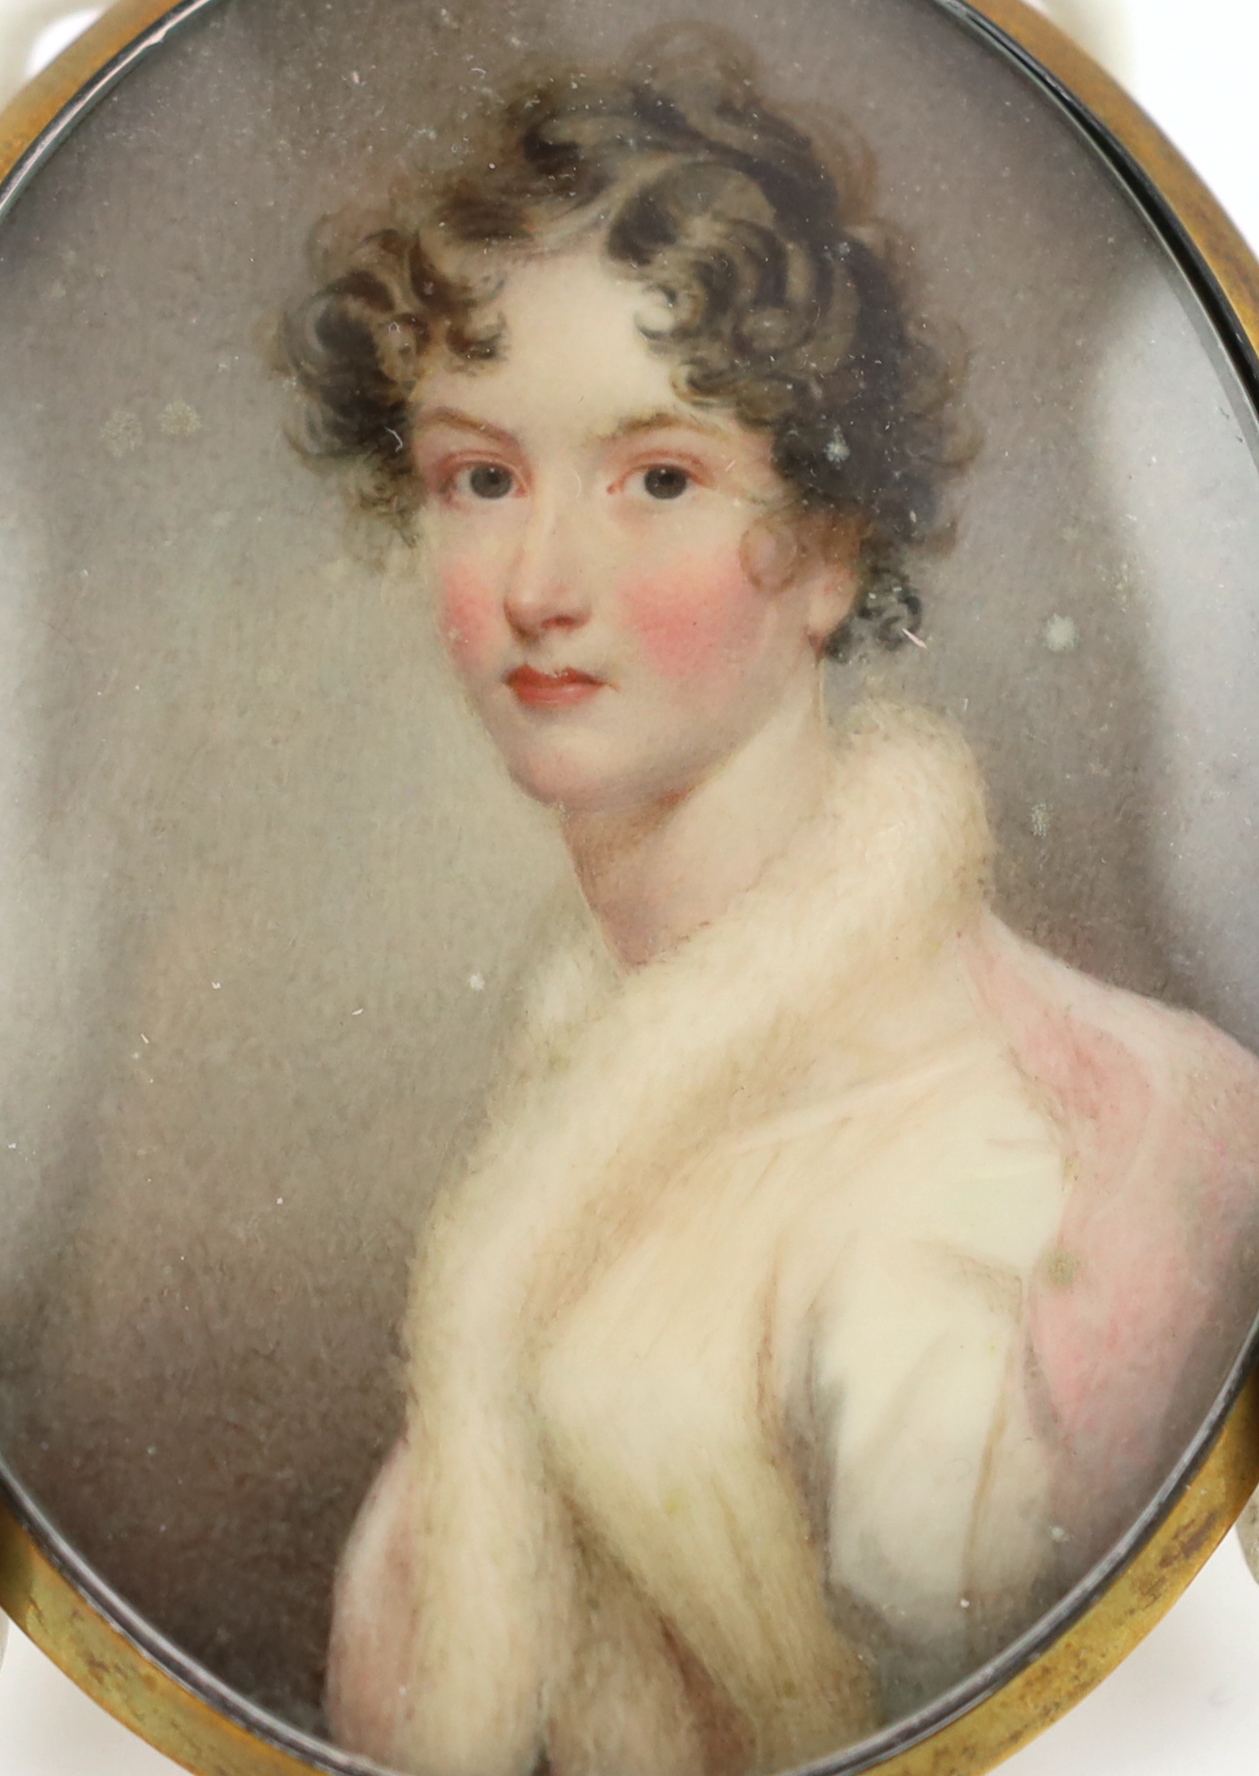 Attributed to Thomas Hargreaves (1775-1846), Portrait miniature of a young lady, watercolour on ivory, 7.5 x 5.8cm. CITES Submission reference LWVZB2DQ